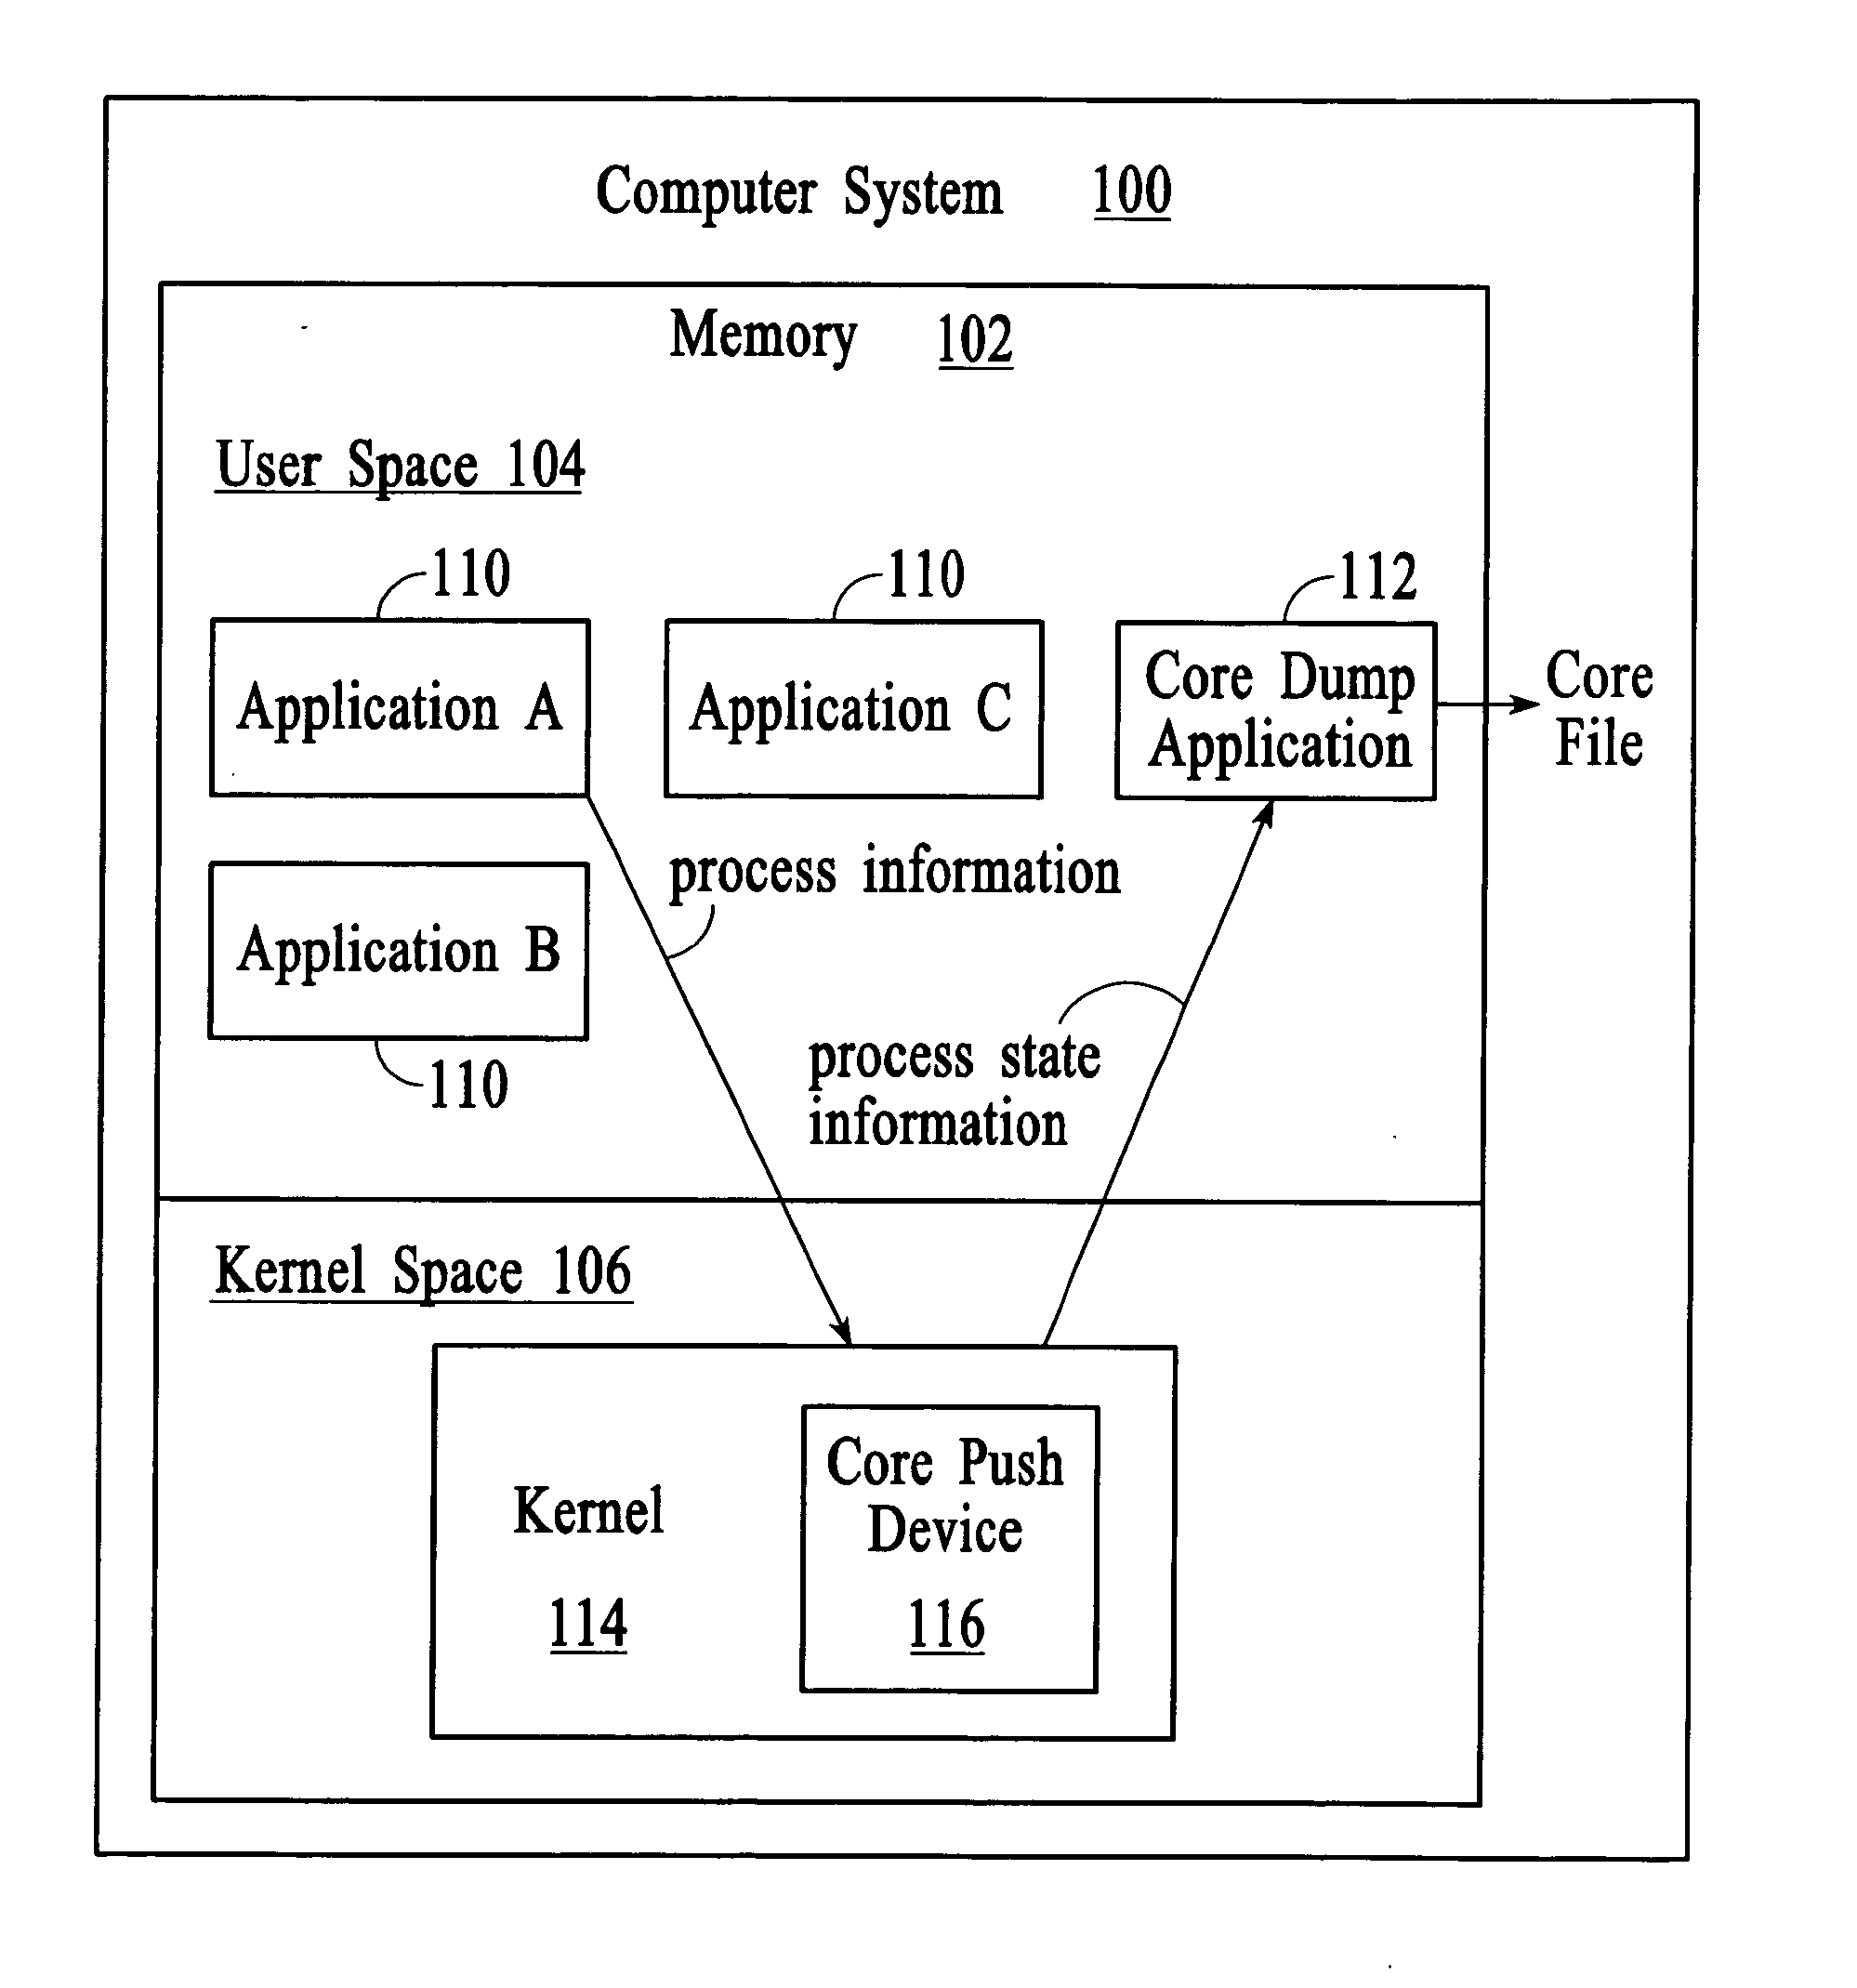 Managing process state information in an operating system environment